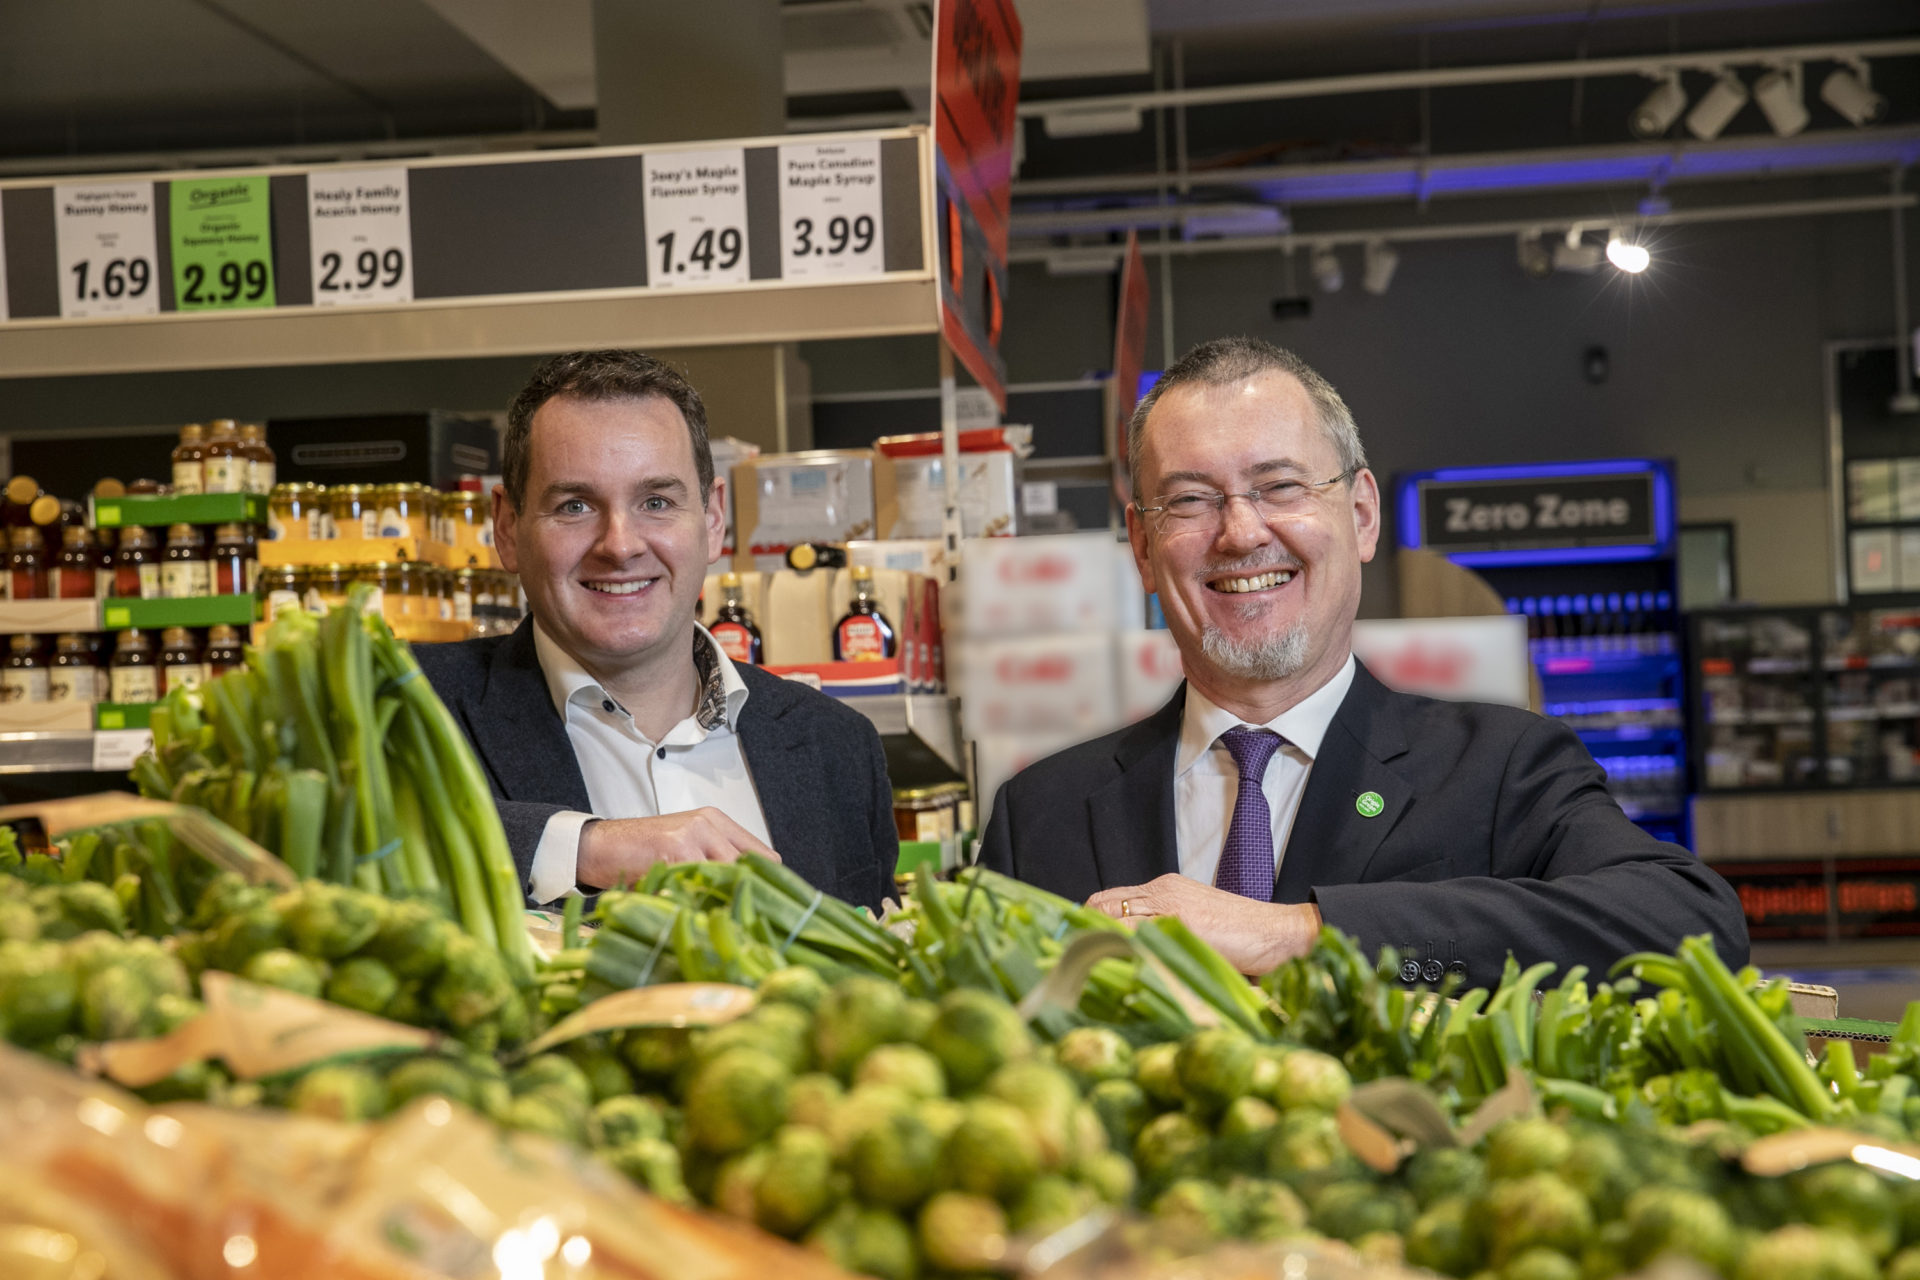 J.P. Scally, CEO of Lidl Ireland, and Jim O’Toole, CEO of Bord Bia at the launch of Lidl’s Supplier Impact Report for 2022.